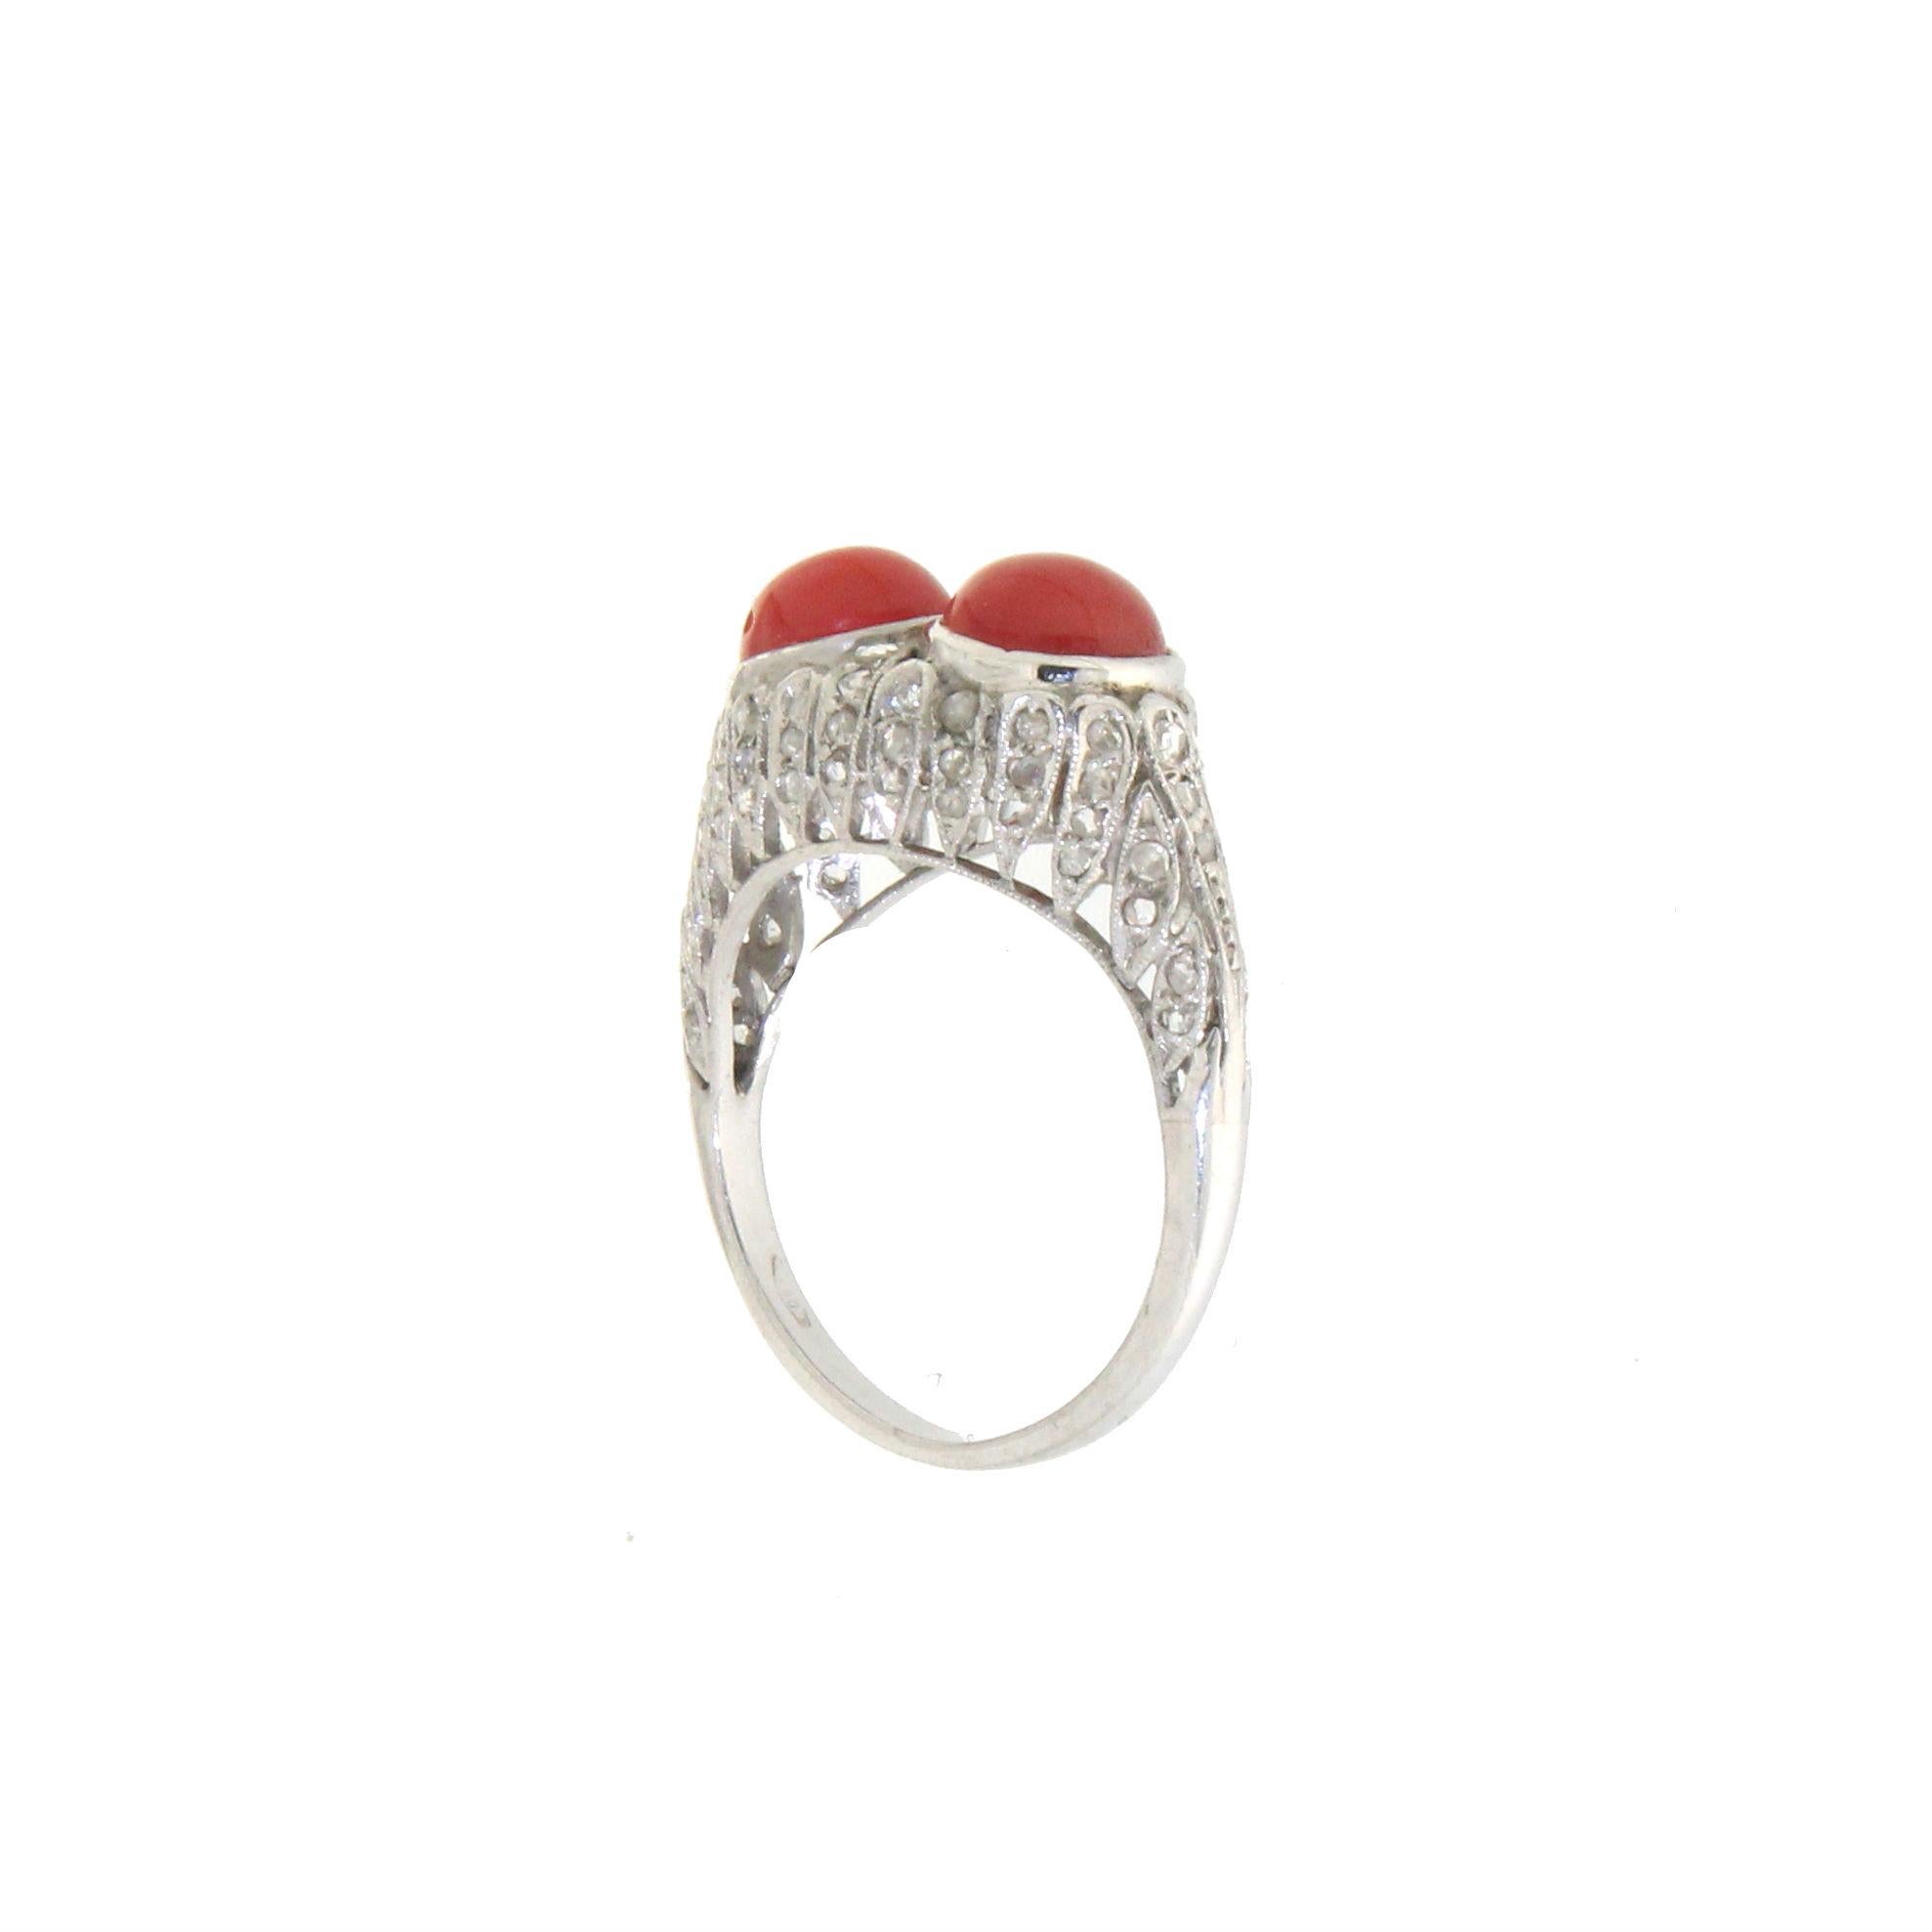 Handcraft Sardinian Coral 18 Karat White Gold Diamonds Cocktail Ring In New Condition For Sale In Marcianise, IT